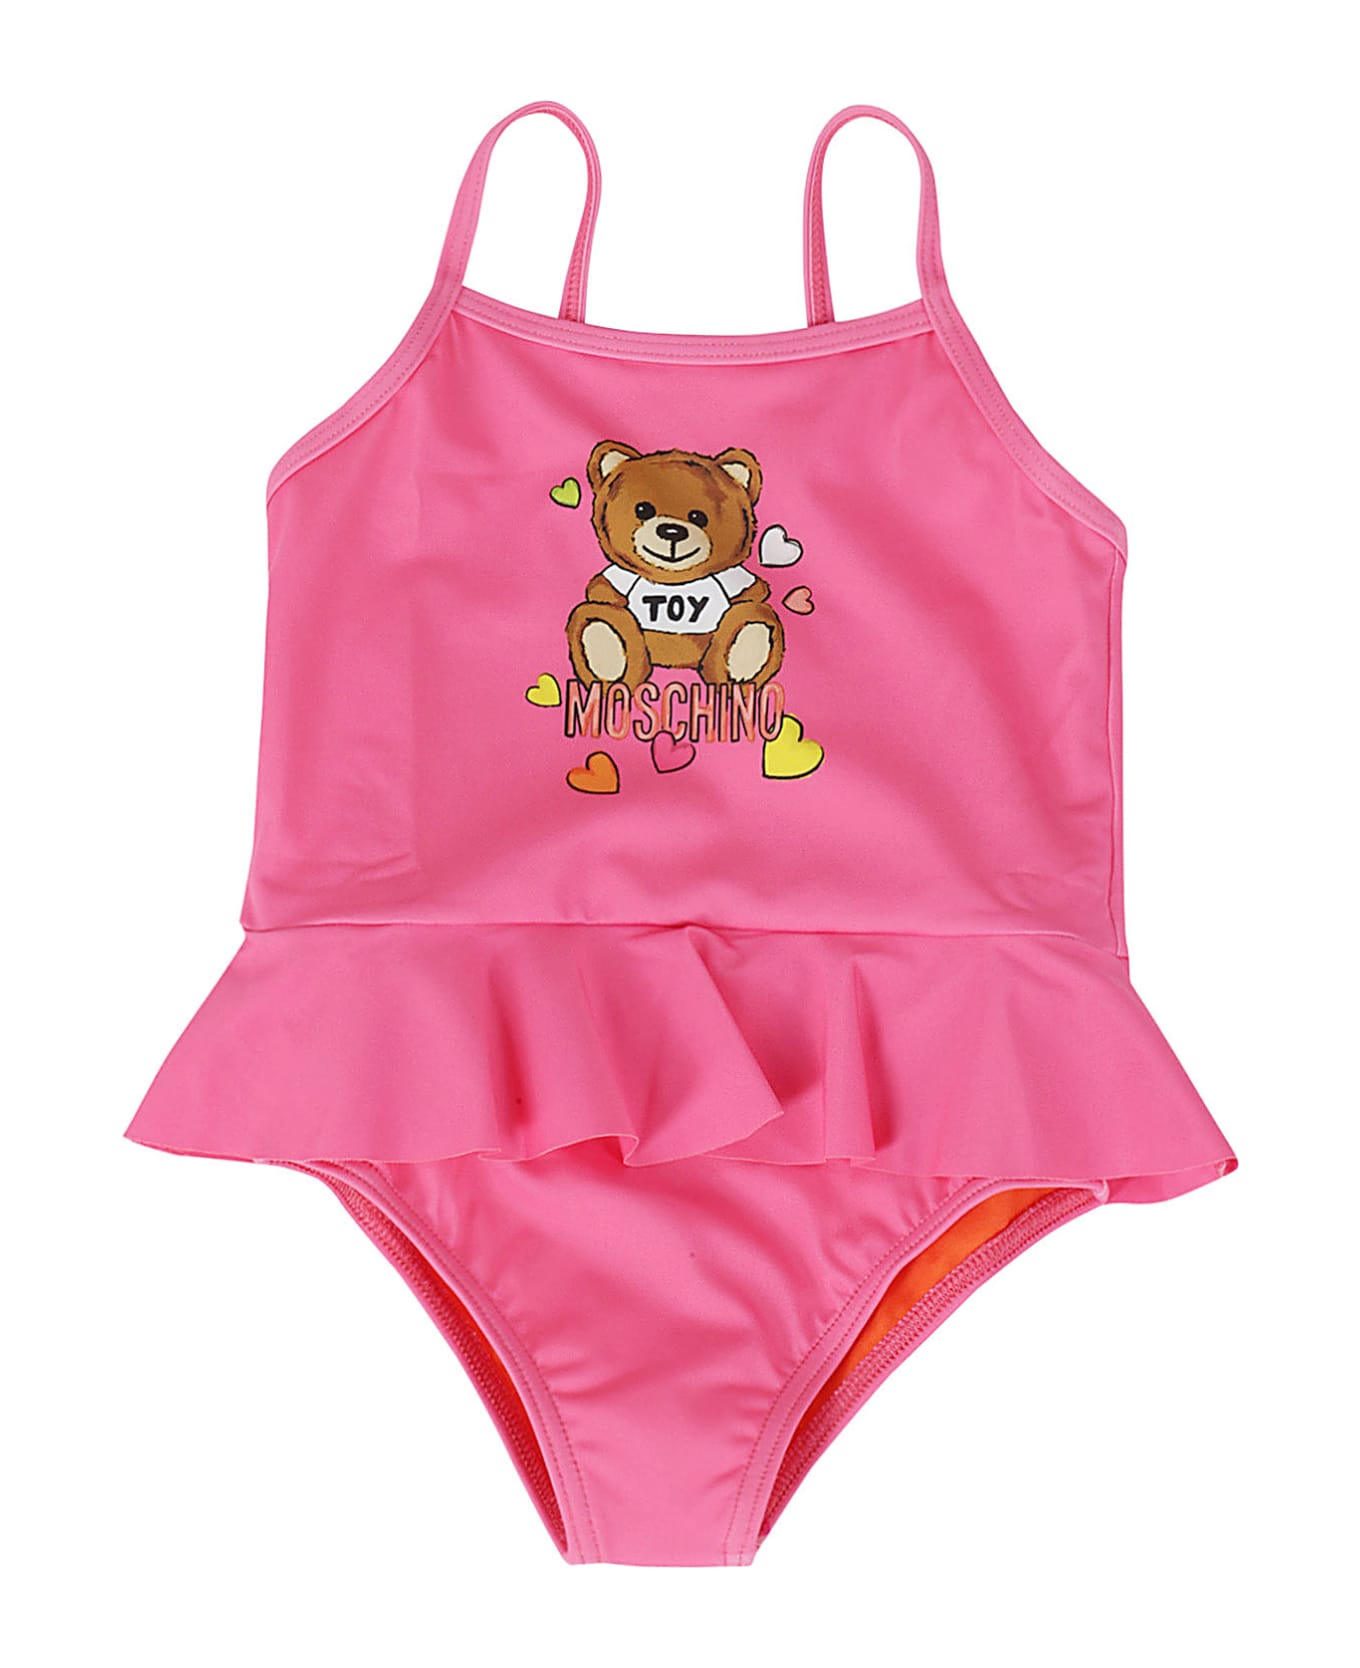 Moschino Swimsuit - Fuxia